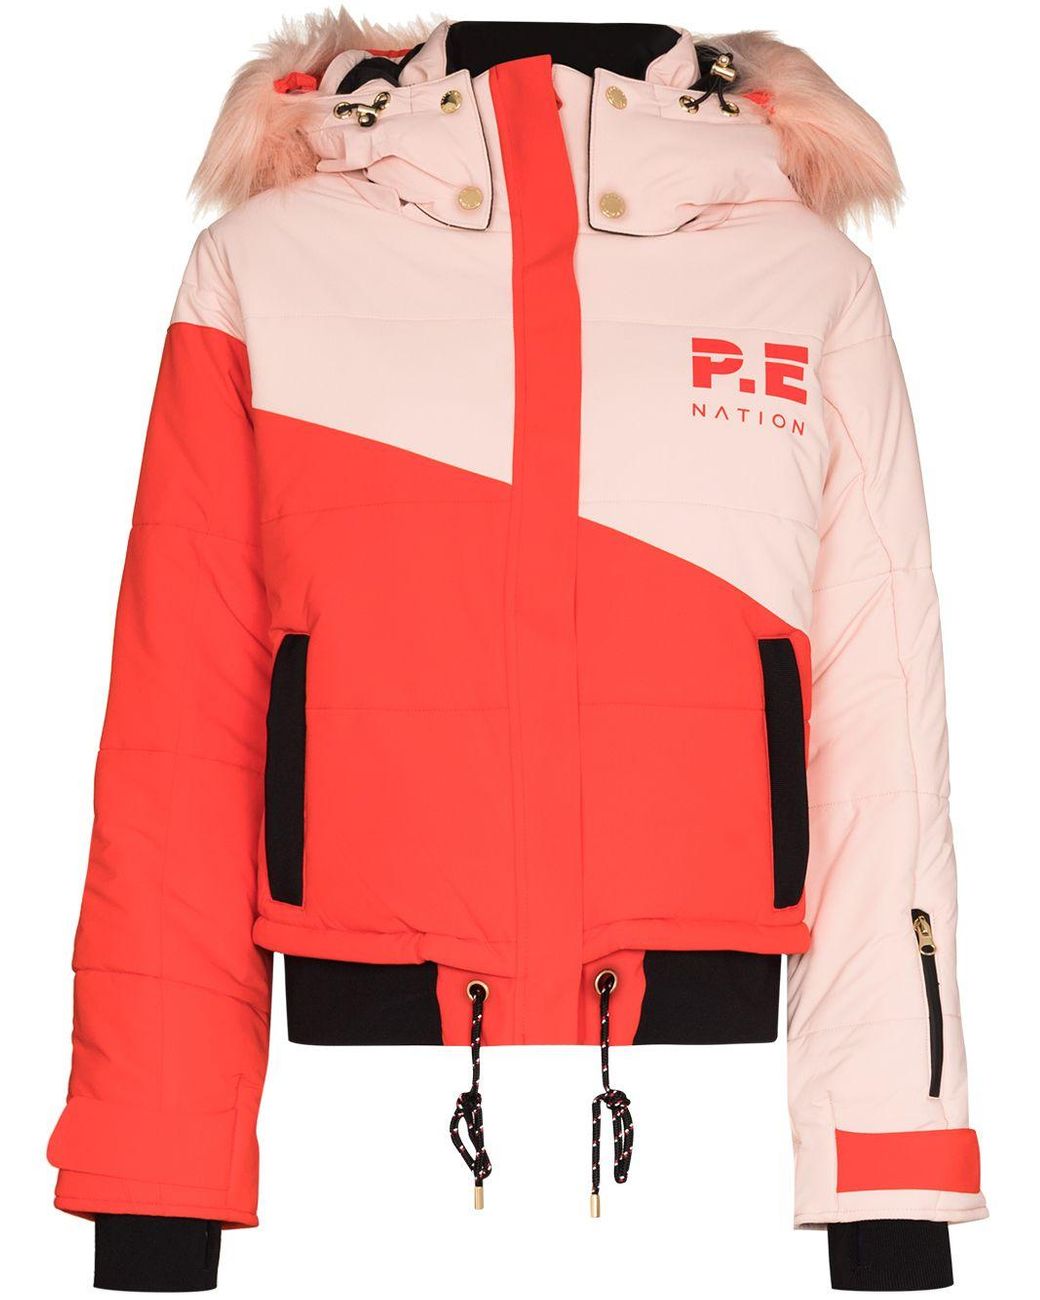 P.E Nation Amplitude Hooded Ski Jacket in Red | Lyst